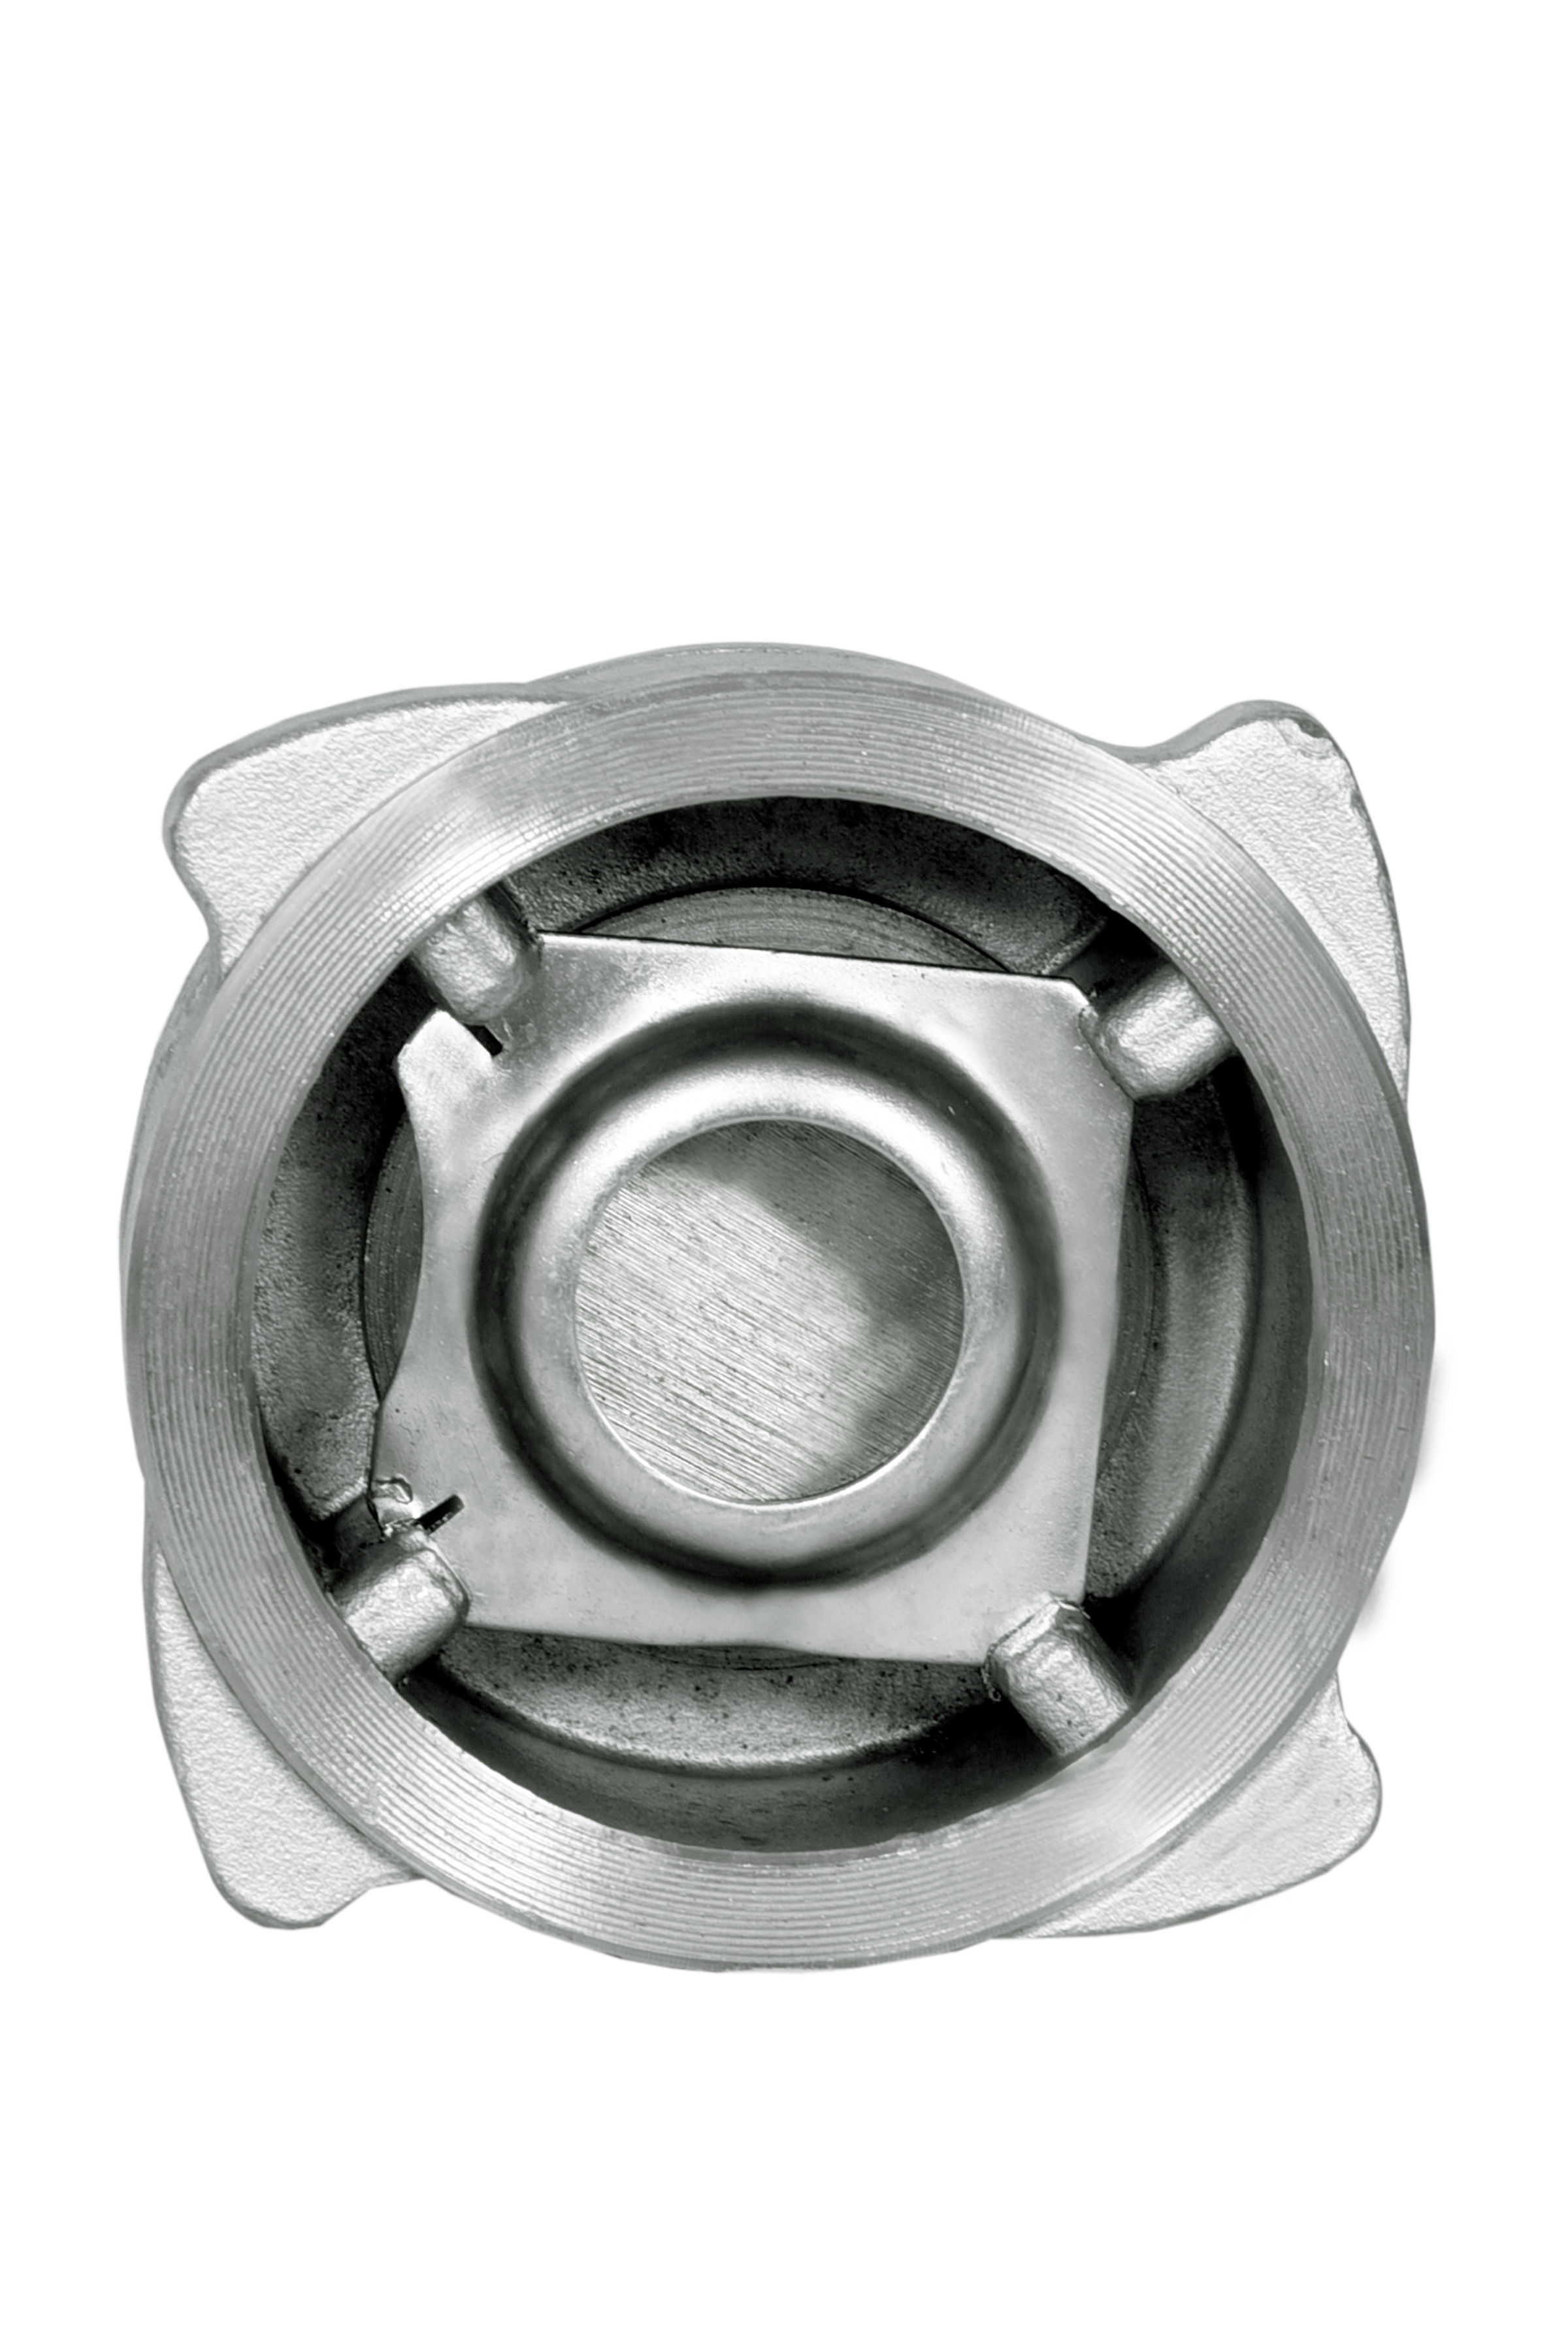 SS Disk Check Valve Manufacturers In India